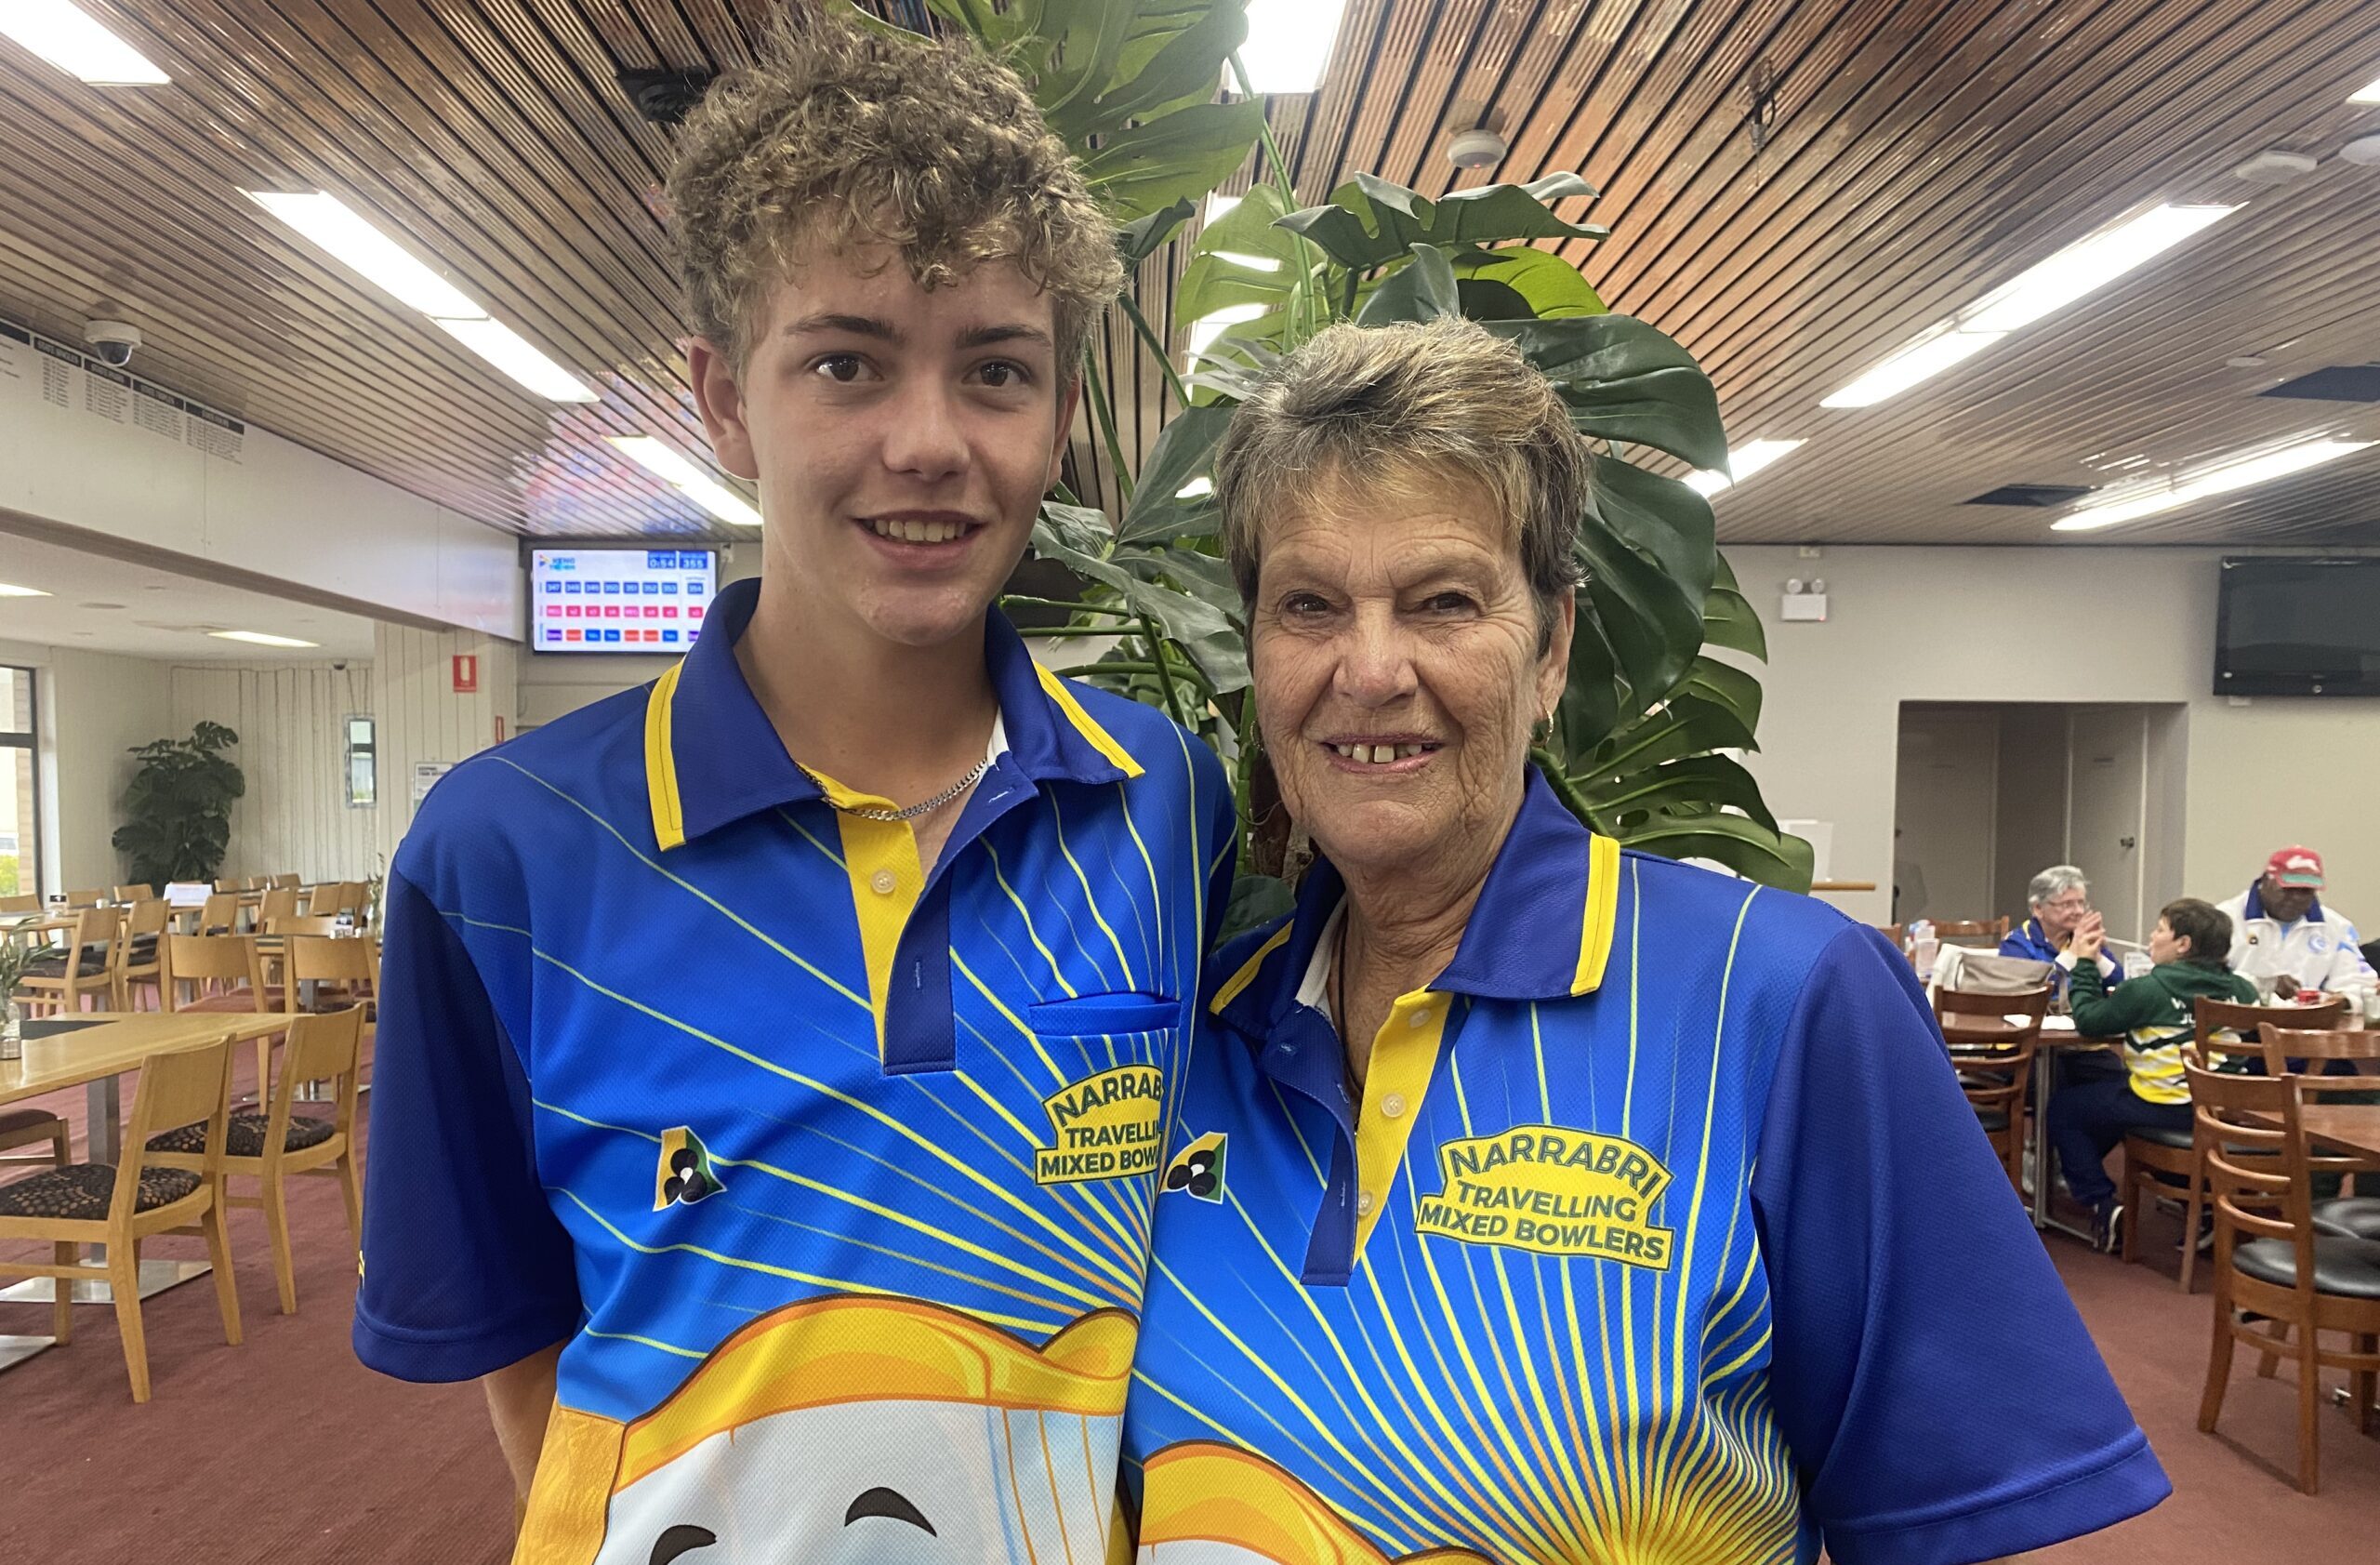 Narrabri Travelling Mixed Bowlers host a long weekend tournament